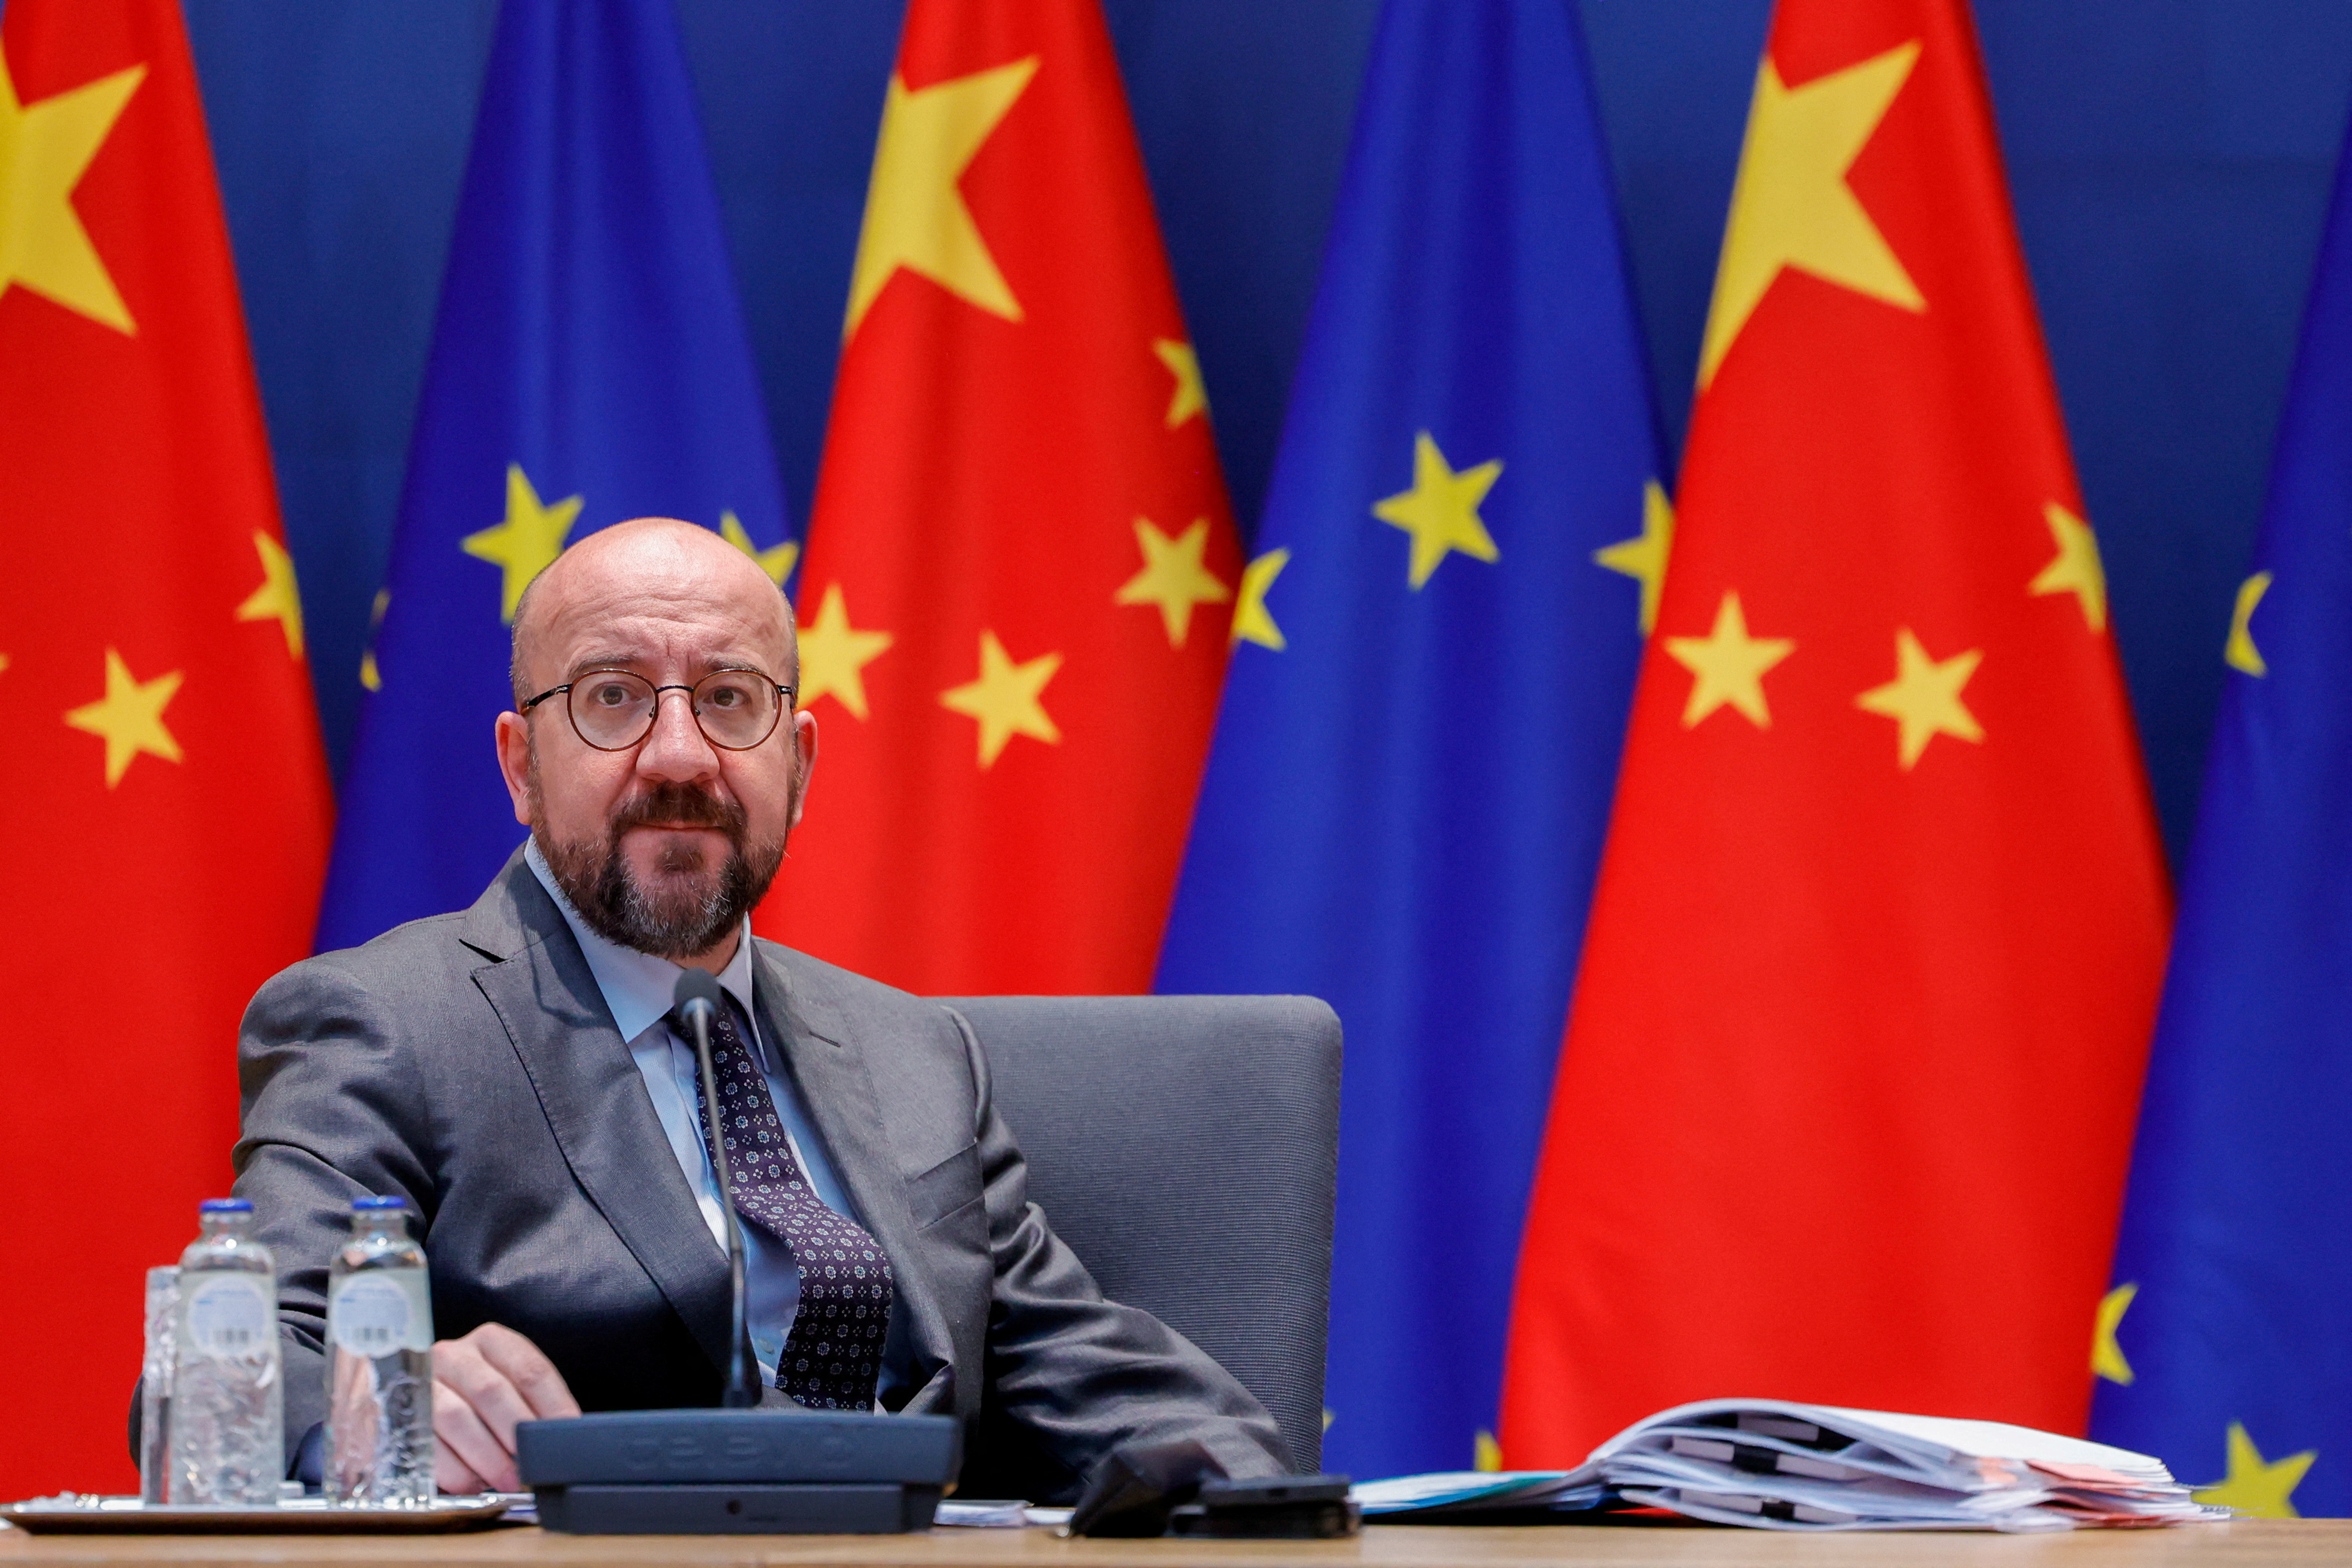 The virtual summit between the European Union and China in Brussels